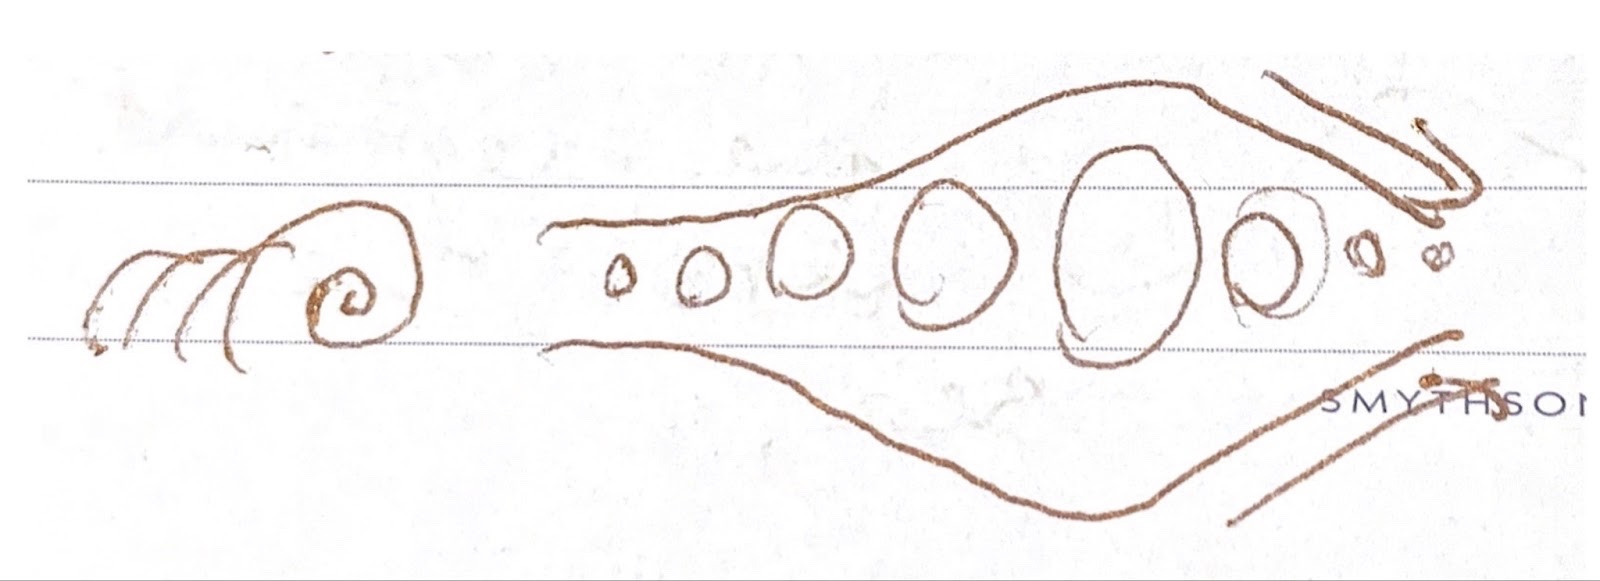 The third image in a series of sound design sketches by Talia Augustidis. This image is called An Elephant Walk. Brown pen markings on the pages of a lined notebook. On the left hand side of the image a series of lines lean into a curl - like the shell of a snail or the curve of a crashing wave. On the right a series of circles which grown larger and larger before beginning to shrink down again. They are framed by two lines, giving the impression of a tunnel filled with bubbles. Two arrows mark the right hand side of the tunnel as it shrinks into silence.